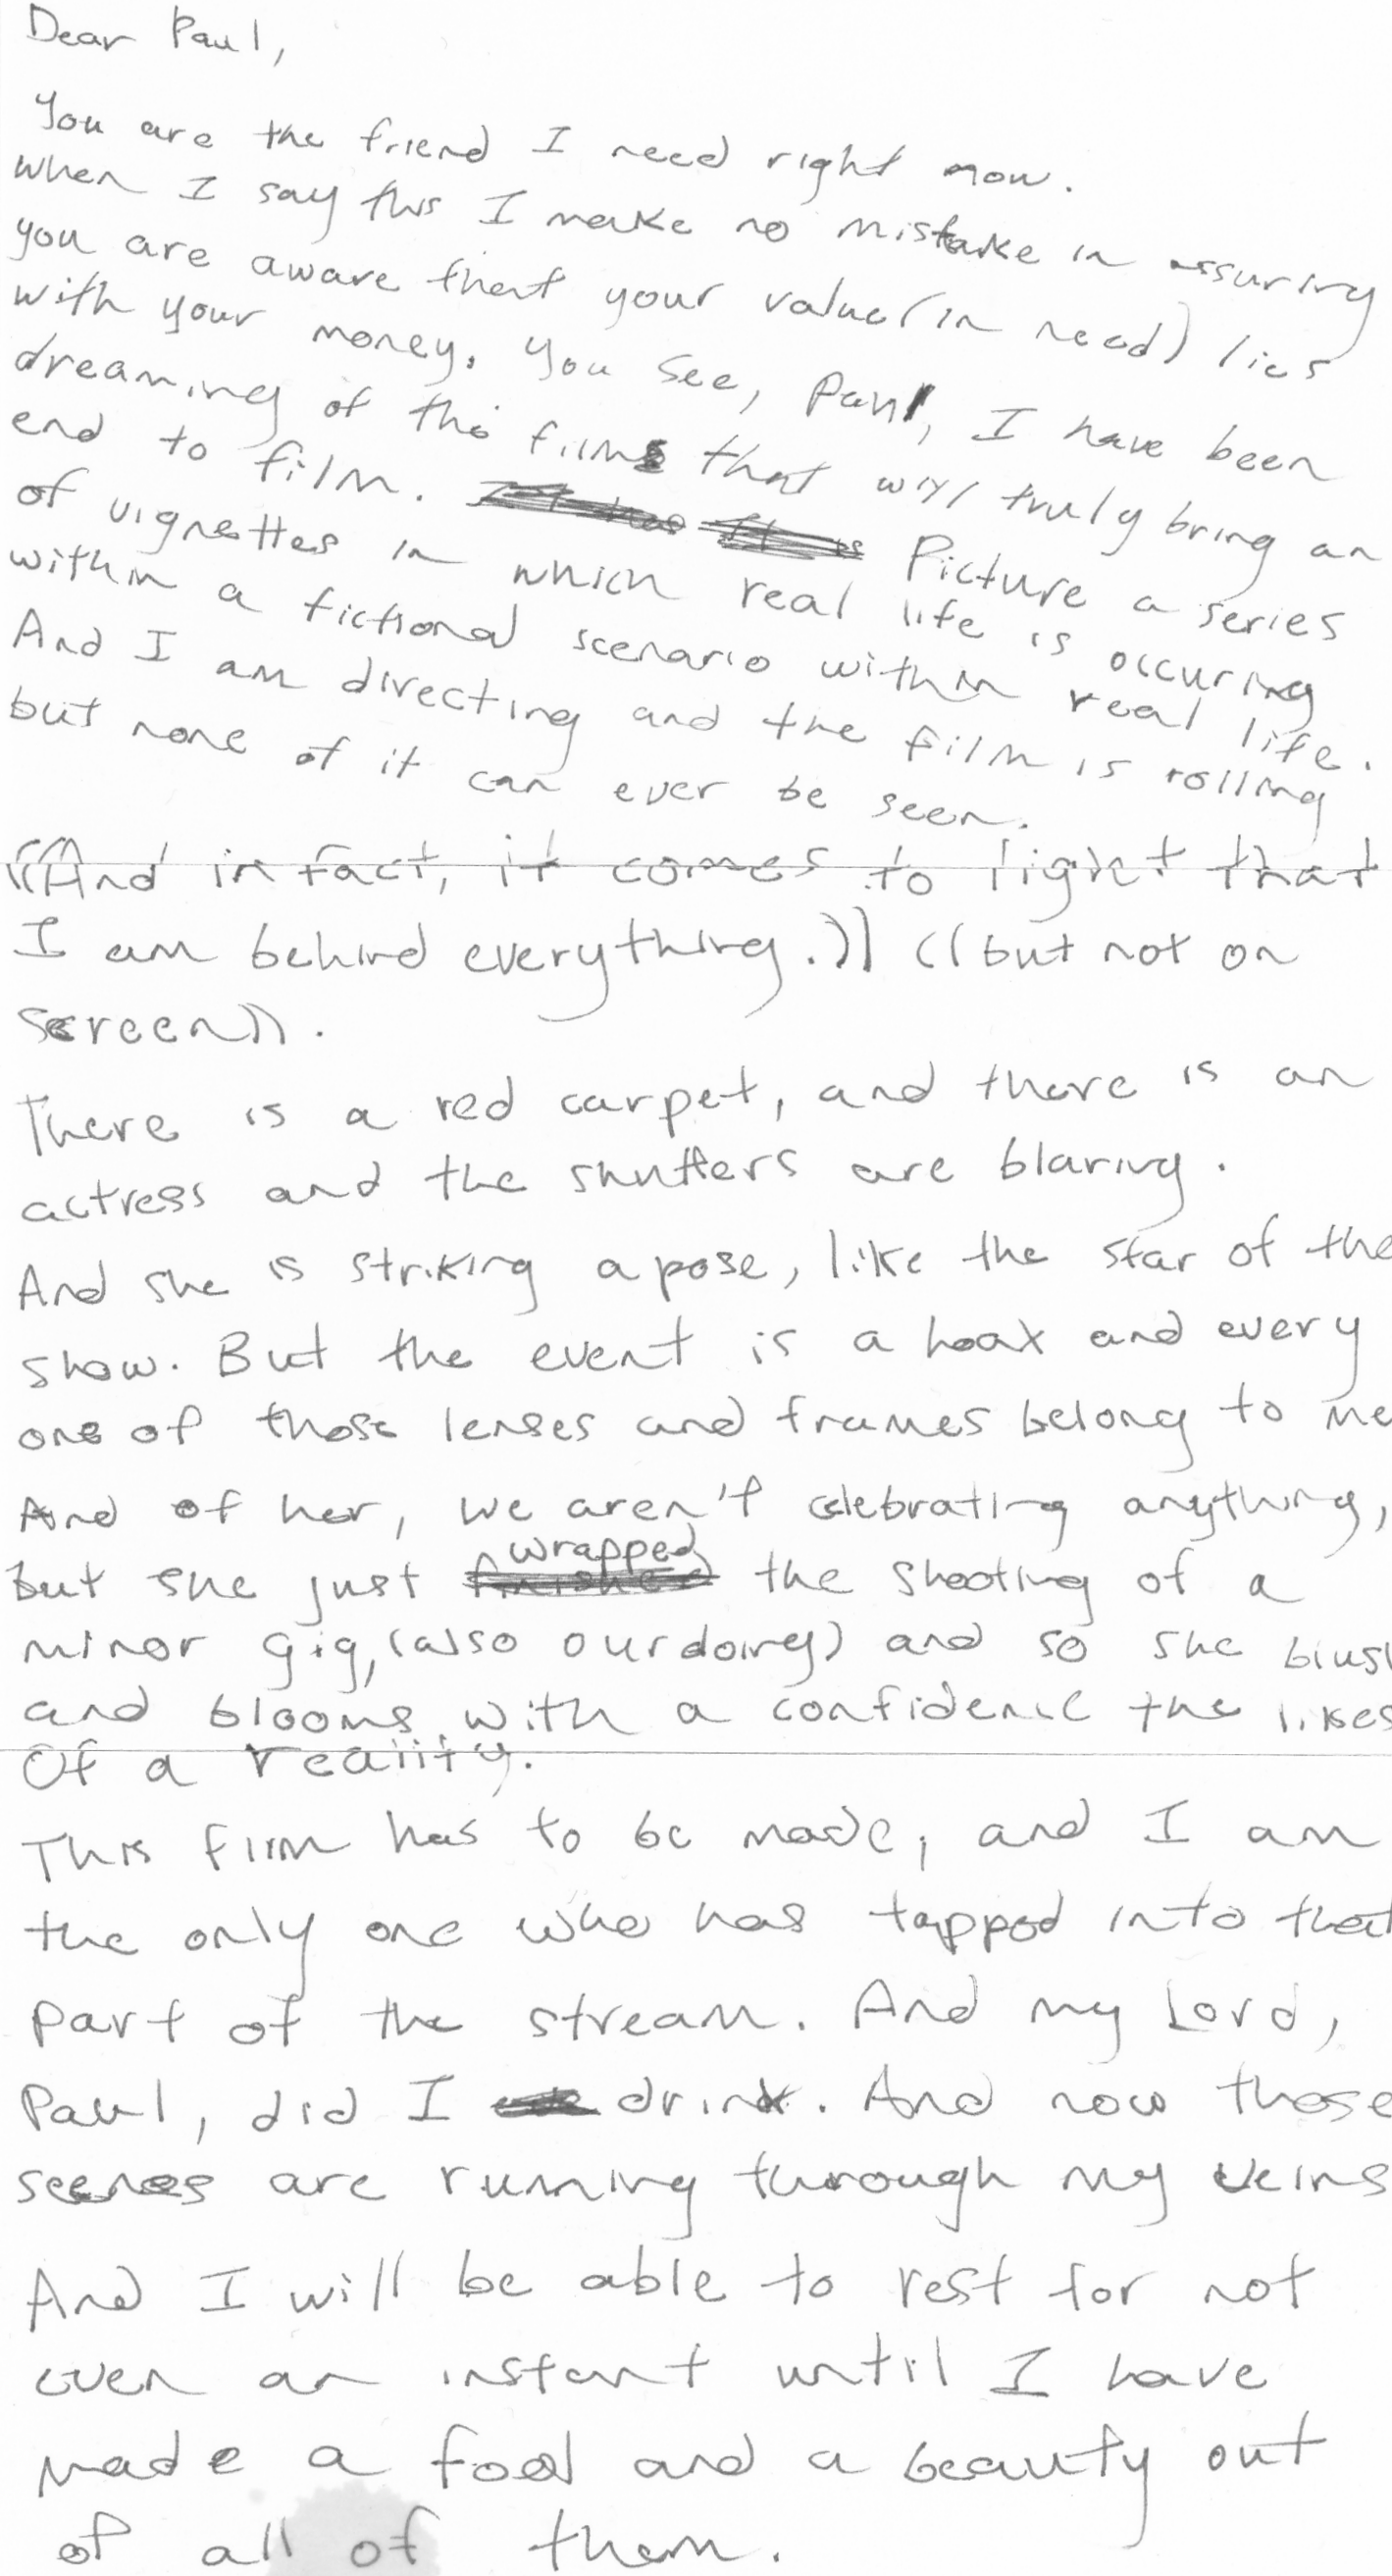 a letter, addressed to Paul. The contents read: Dear Paul, You are the friend I need right now. When I say this, I make no mistake in assuring you are aware that your value ((in need)) lies in your money. You see, Paul, I have been dreaming of a film that will truly bring an end to film — Picture a series of vignettes in which real life is occurring (within a fictional scenario) within real life. And I am directing, and the film is rolling, but none of it can ever be seen. ((And in fact, it comes to light that I am behind everything;)) ((But not on screen)) There is a red carpet, and there is an actress, and the shutters are blaring. And she is striking a pose, like the star of the show... But the event is a hoax. And every one of those lenses and frames belong to me. And of her, we aren't celebrating anything. But -- she just wrapped the shooting of a minor gig, ((also our doing)) and so she blushes and blooms with a confidence the likes of a reality ((the likes of which have yet to be seen?)) This film has to be made, and I am the only one who has tapped into that part of the stream. And my Lord, Paul, did ever I drink. And now those scenes are running through my veins. And I will be able to rest for not even an instant in the rest of my life until I have made a fool and a beauty out of all of them.